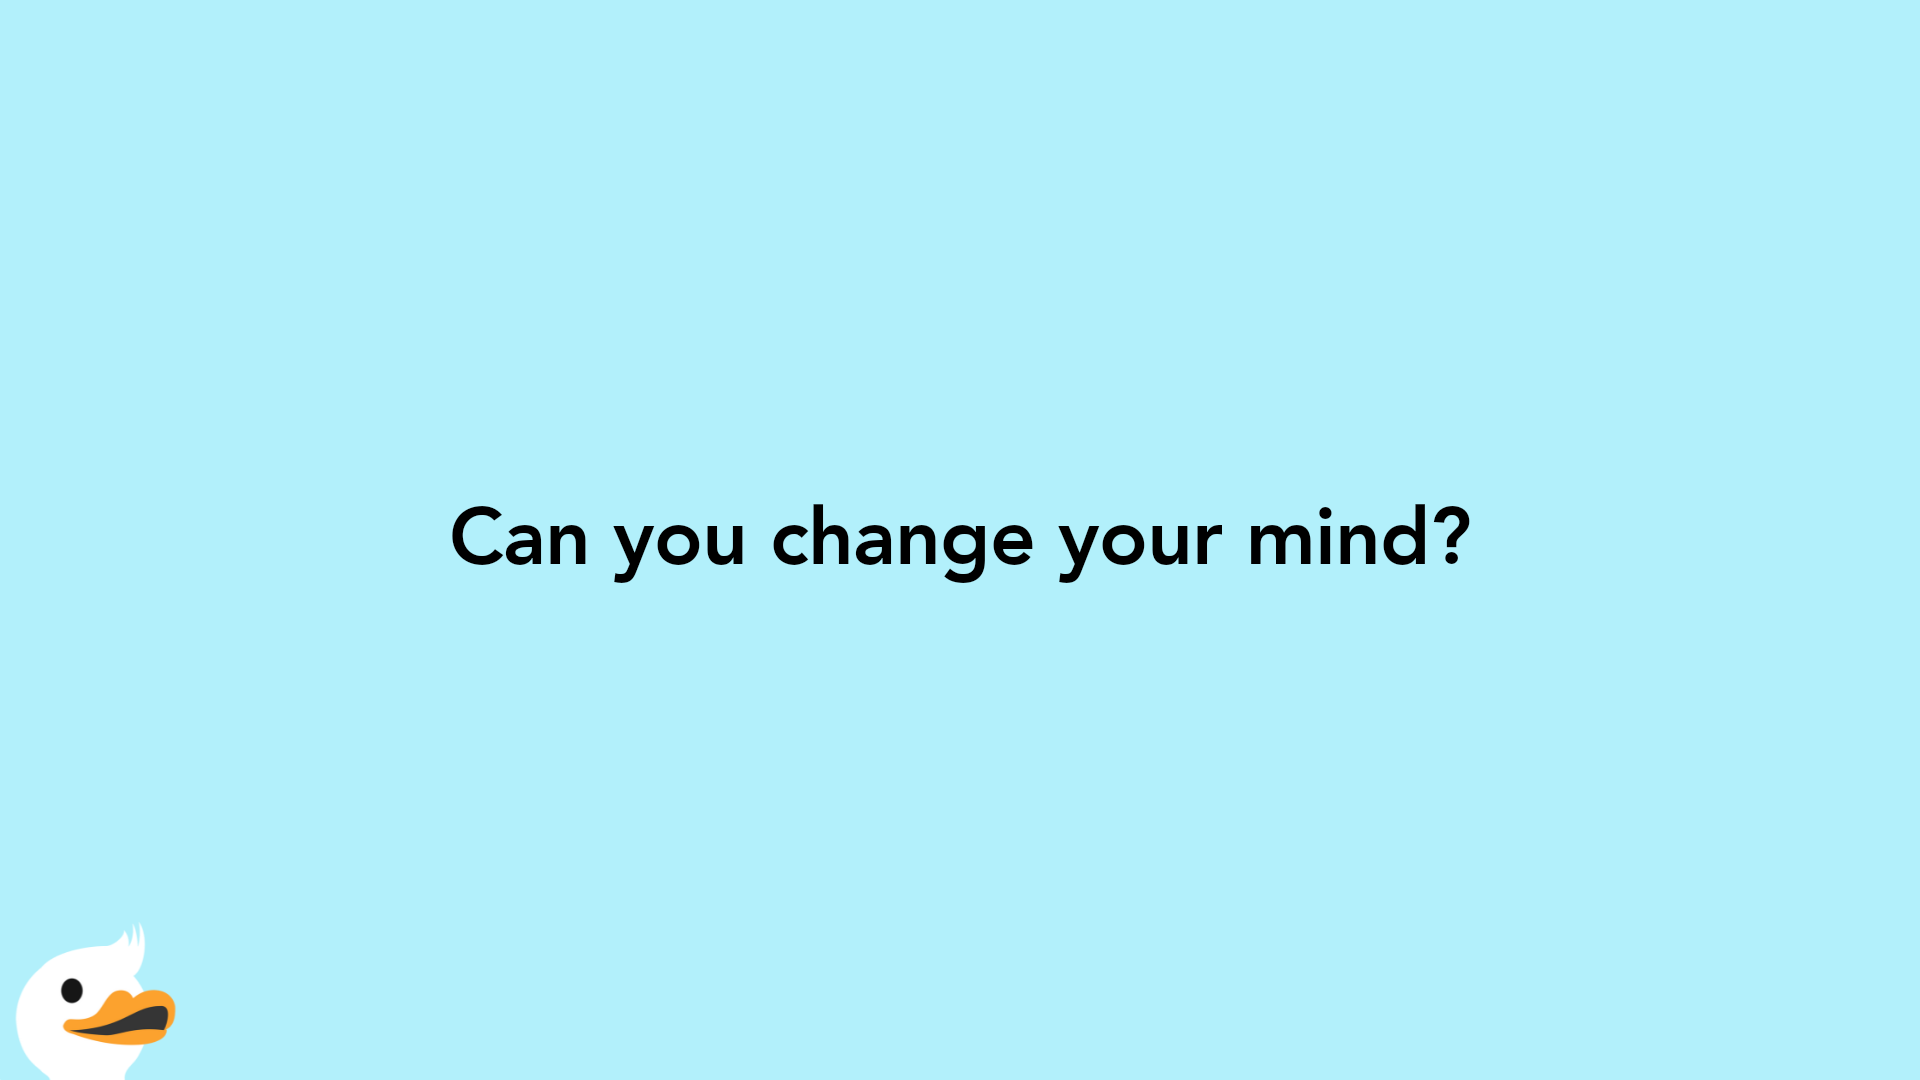 Can you change your mind?